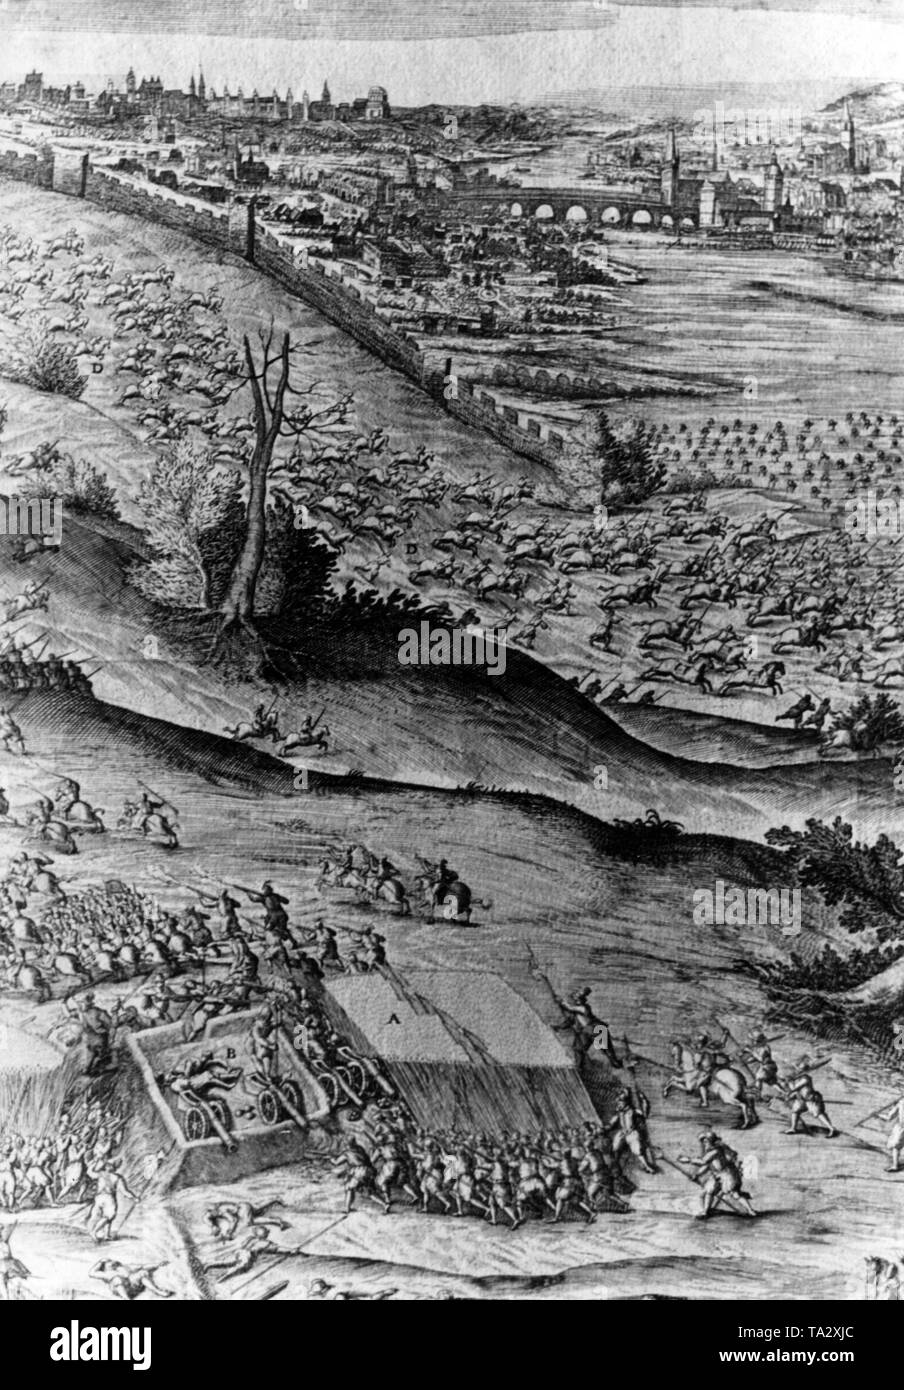 Partial view of an engraving by Sadeler. In this battle, the Protestant army under Frederick V of the Palatinate, the so-called 'Winter King', was defeated by the troops of the Catholic League under the leadership of Tilly. This was an important battle in the early stages of the Thirty Years' War. Stock Photo